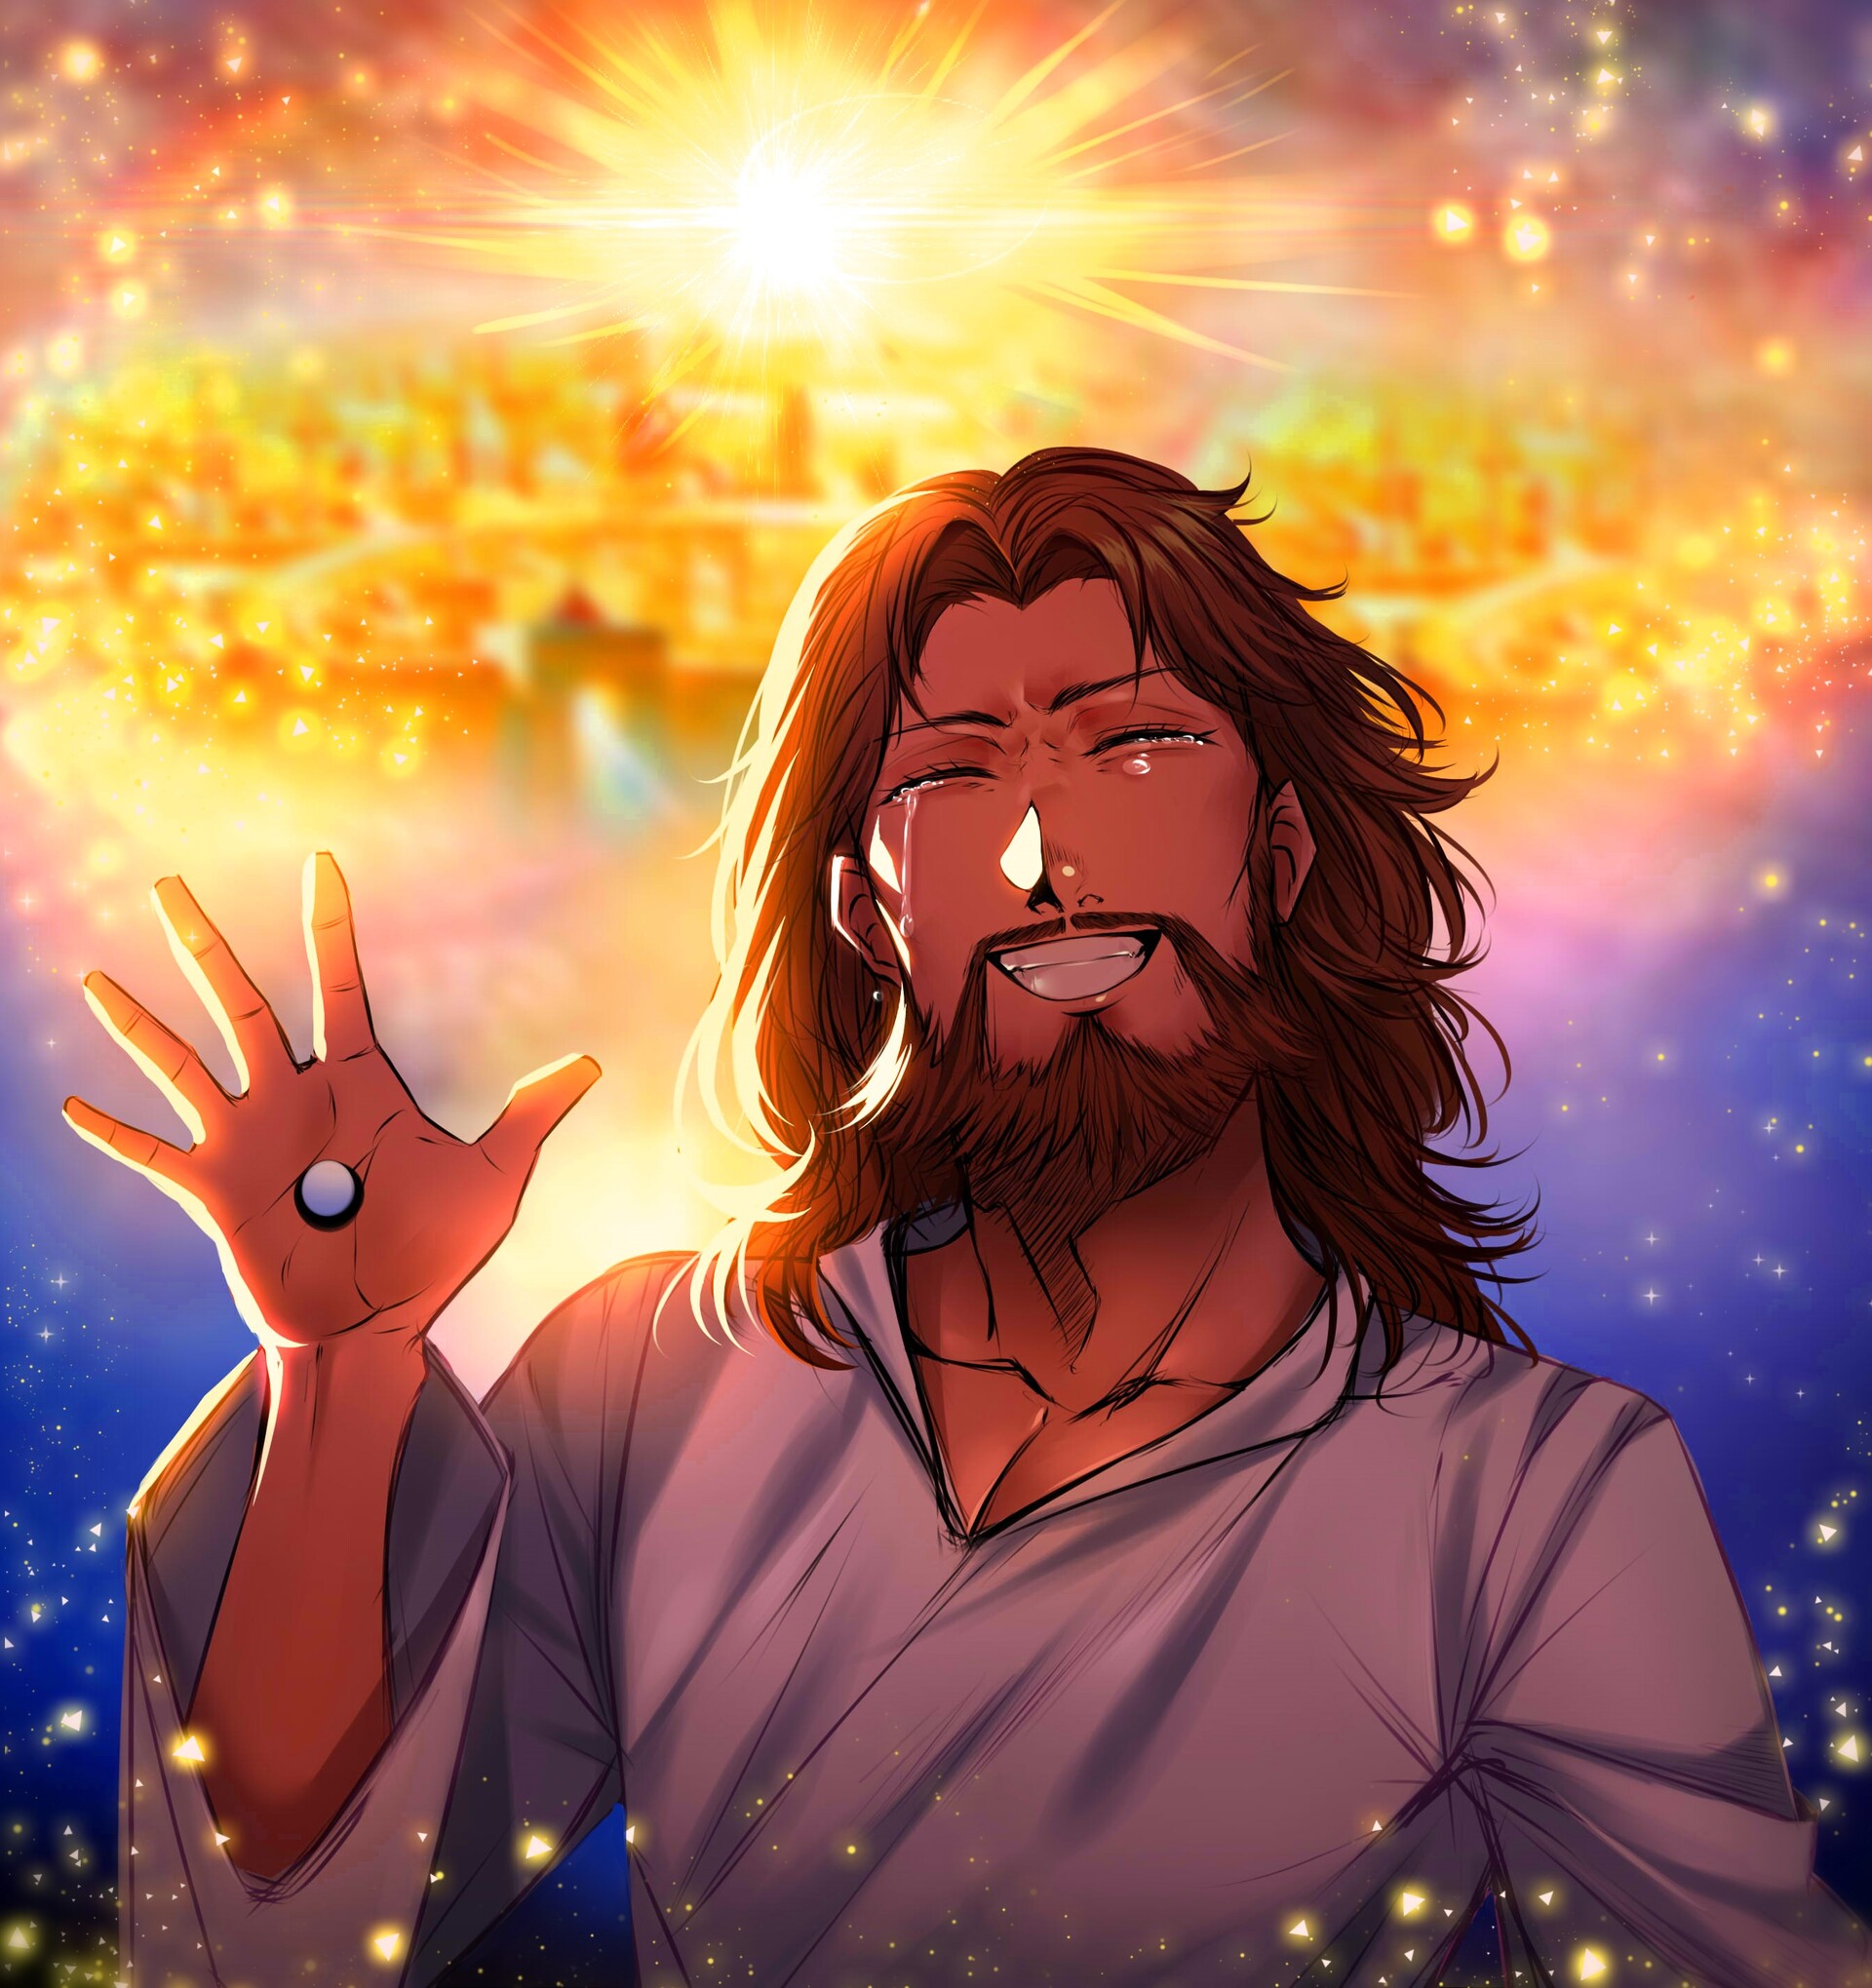 What do you guys think of anime Jesus? : r/teenagers